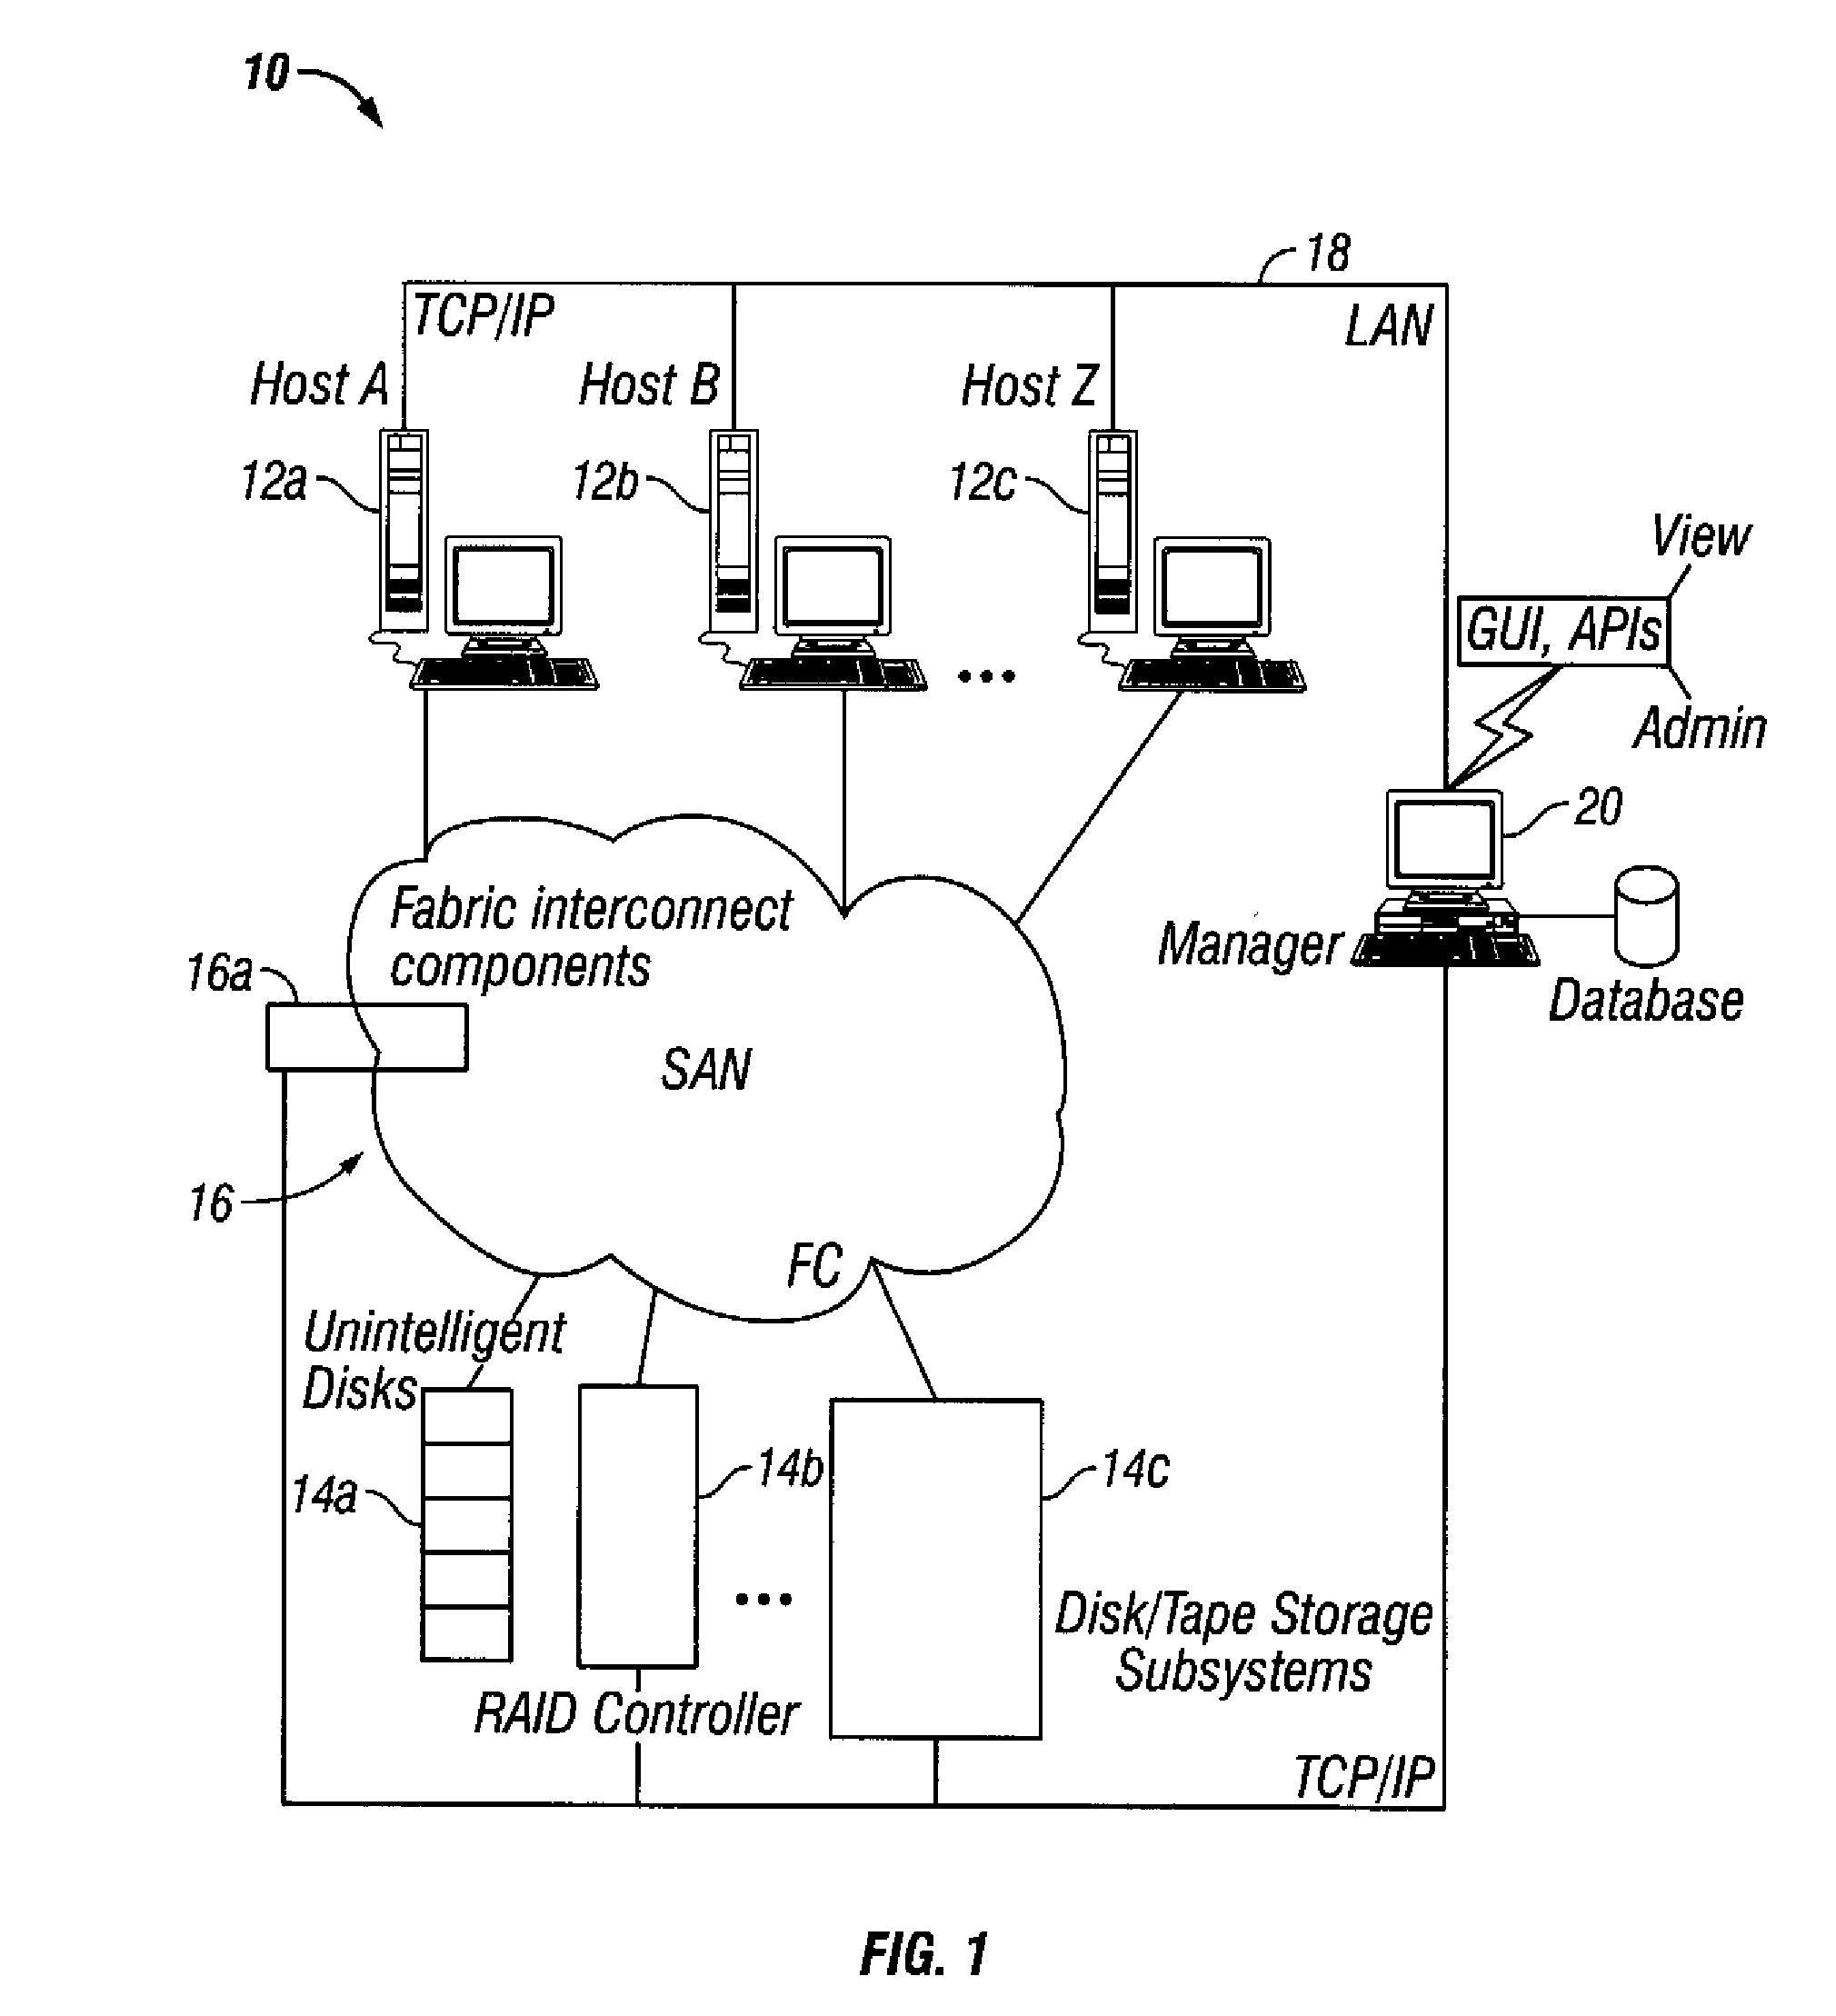 User interface architecture for storage area network